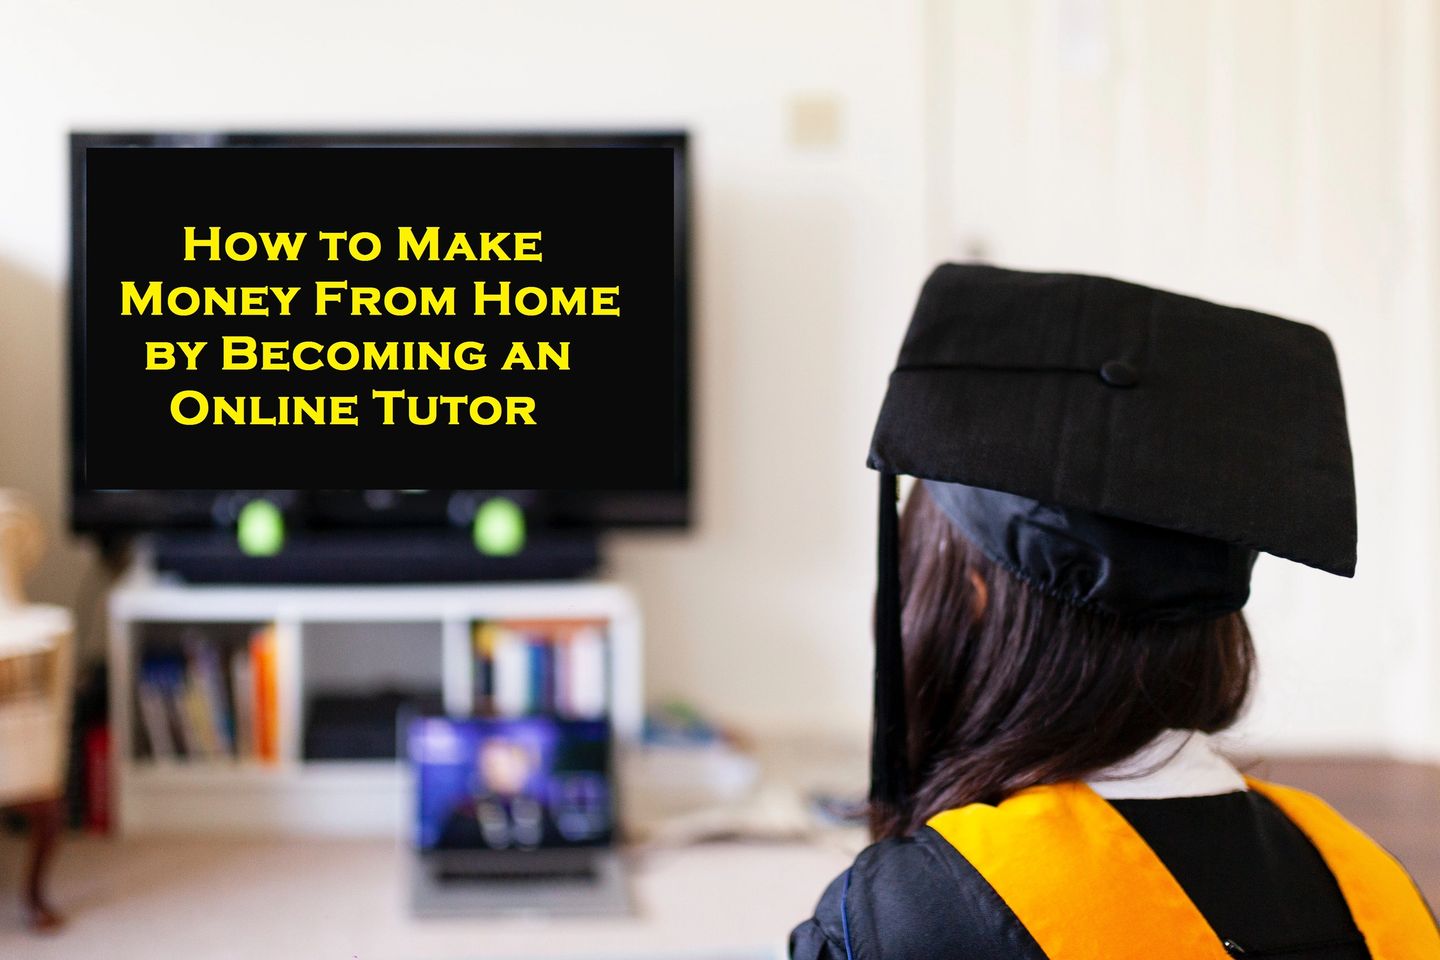 How to Make Money From Home by Becoming an Online Tutor